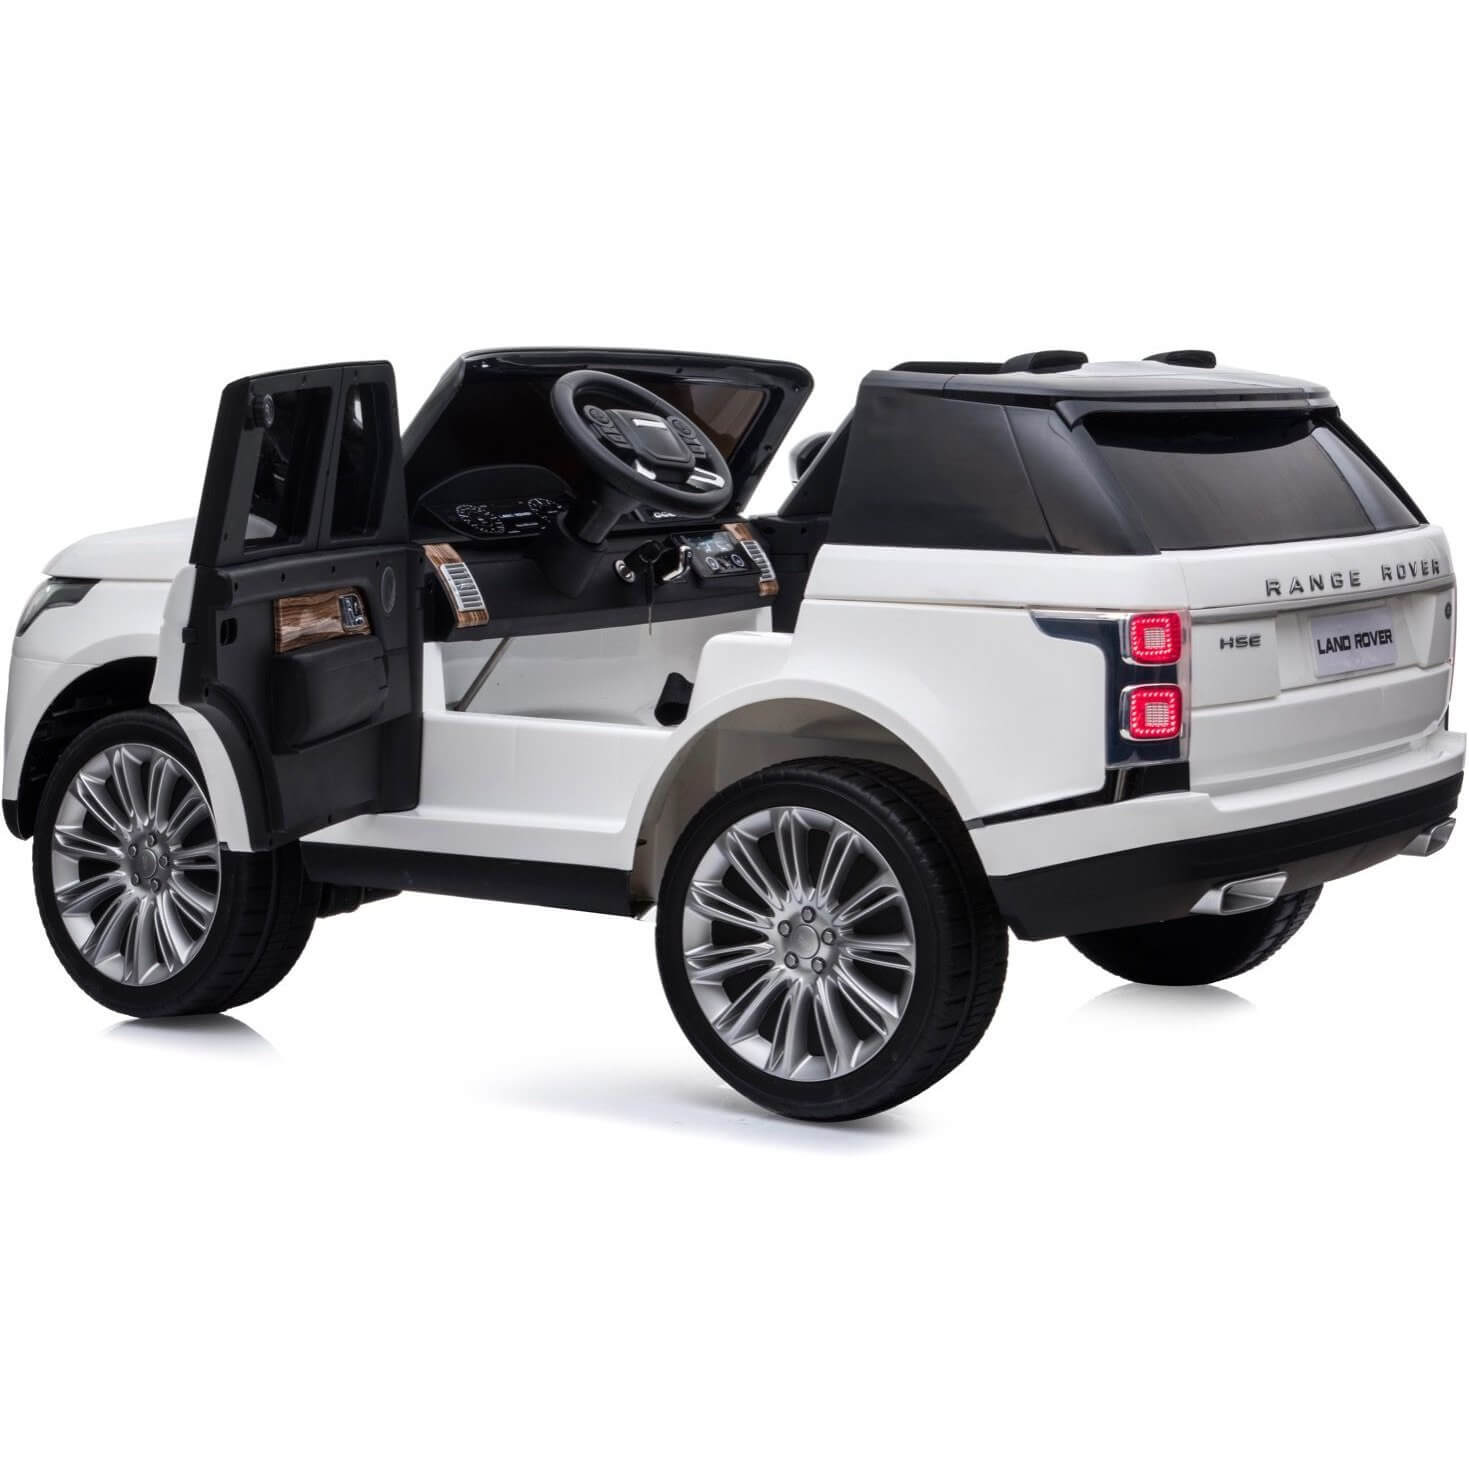 White Licensed Ride On Range Rover Vogue LCD SCREEN Car Two Seater for kids 24V Side Door Open